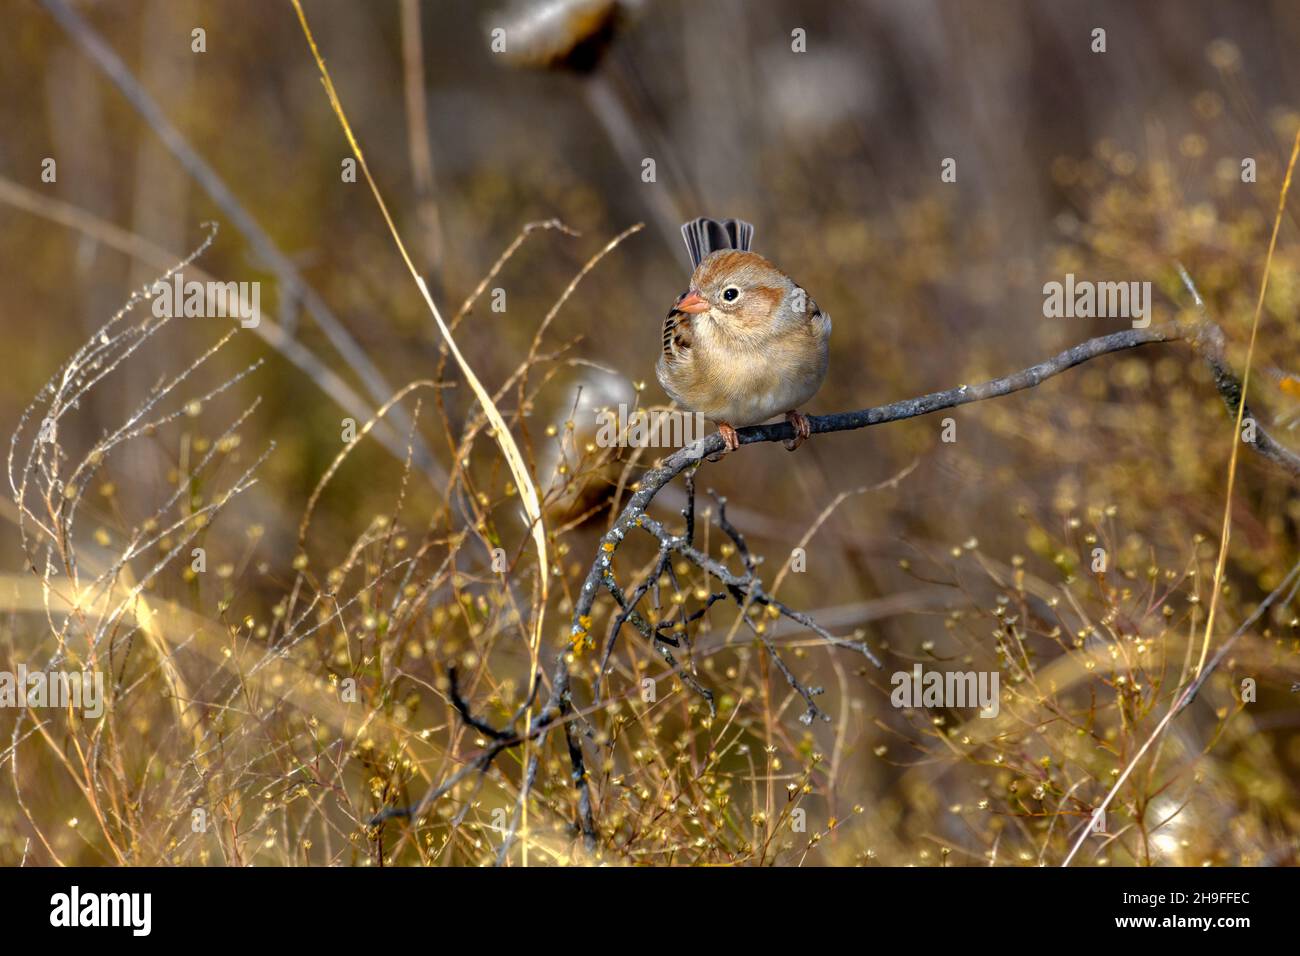 Field Sparrow - Spizella pusilla - perched on twig in tall grass and vegitation Stock Photo